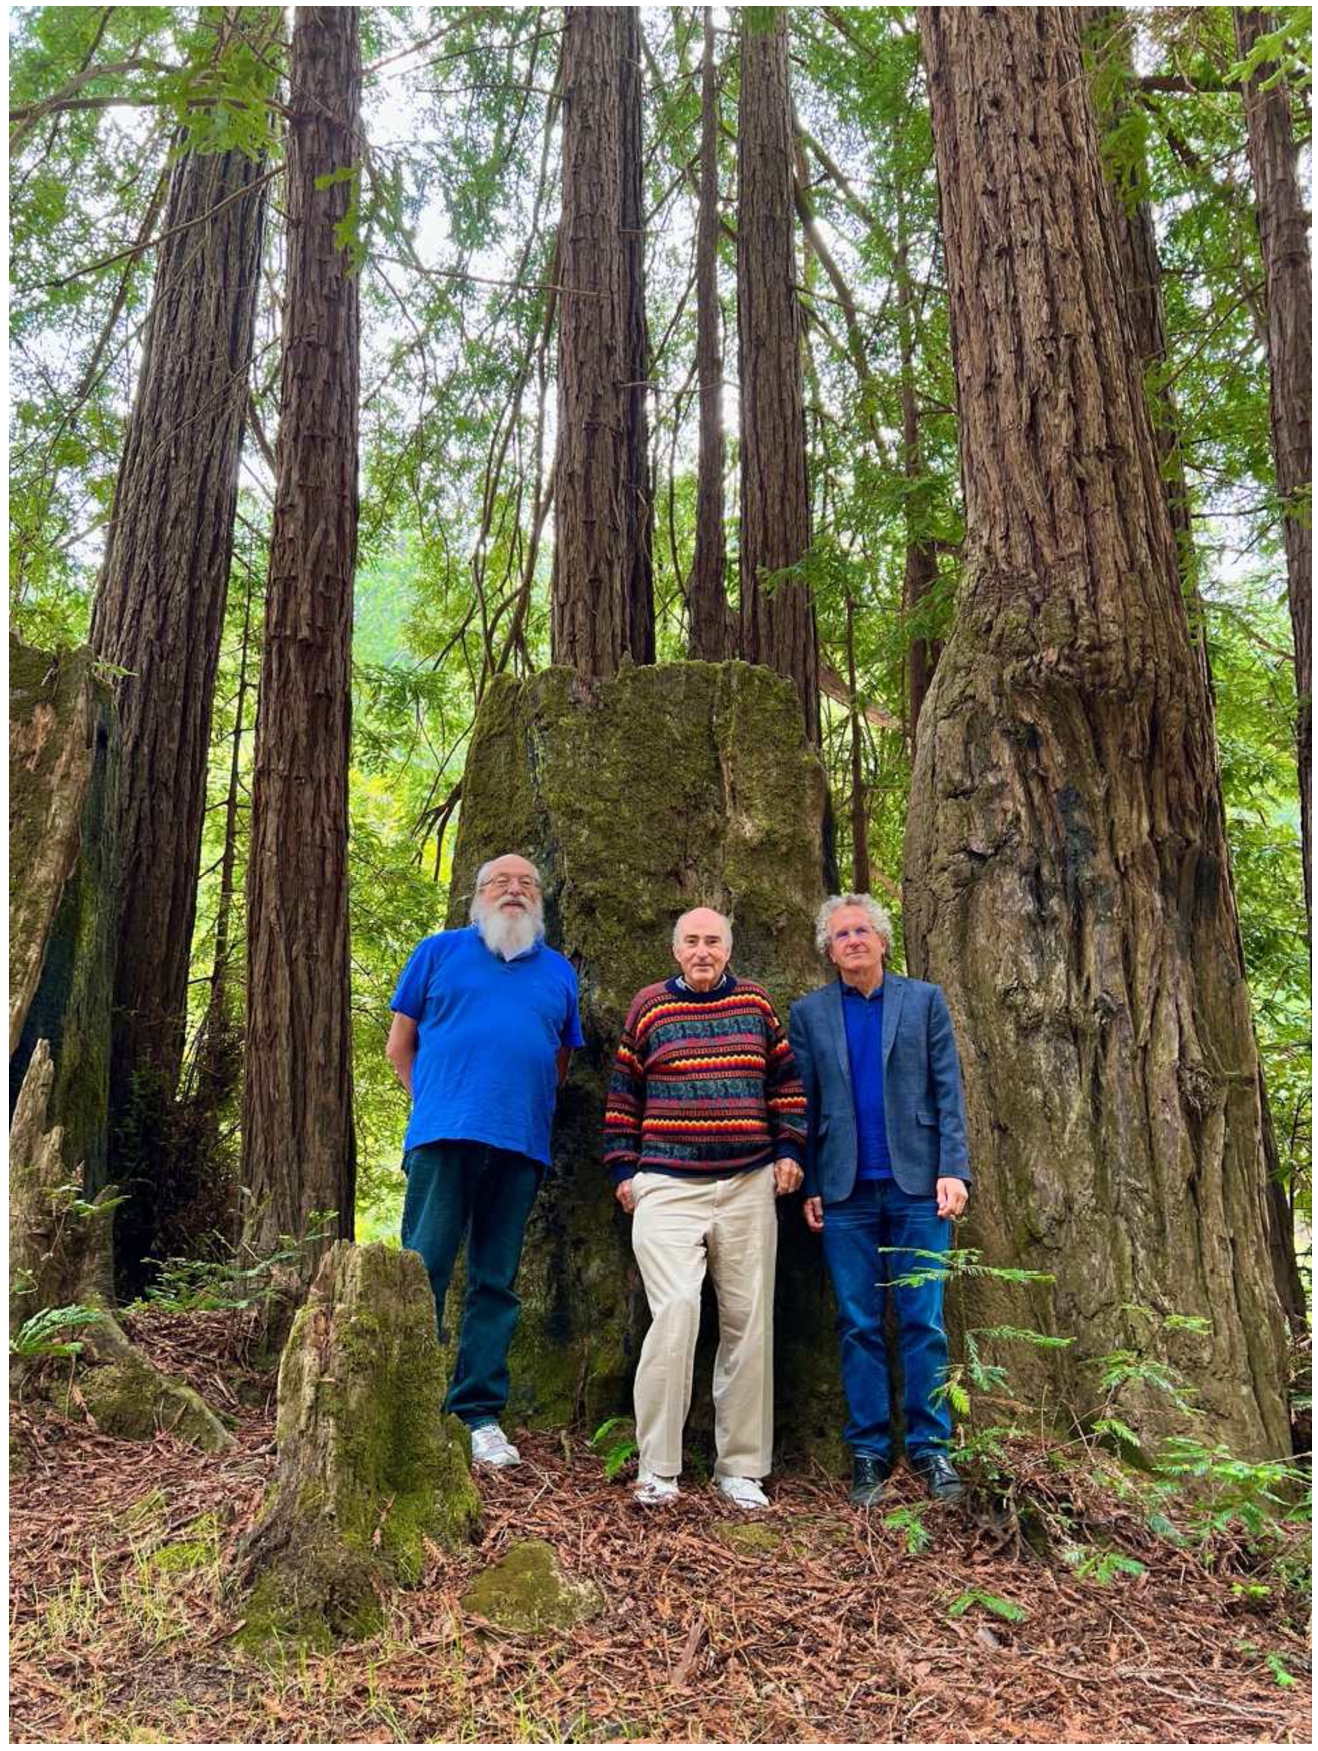 Today – searching for big trees. Left to right: Ken Thompson, Monty Newborn, and Jonathan Schaeffer. Gualala River Redwood Park, June 2022. Photo taken by Jennifer Schaeffer.